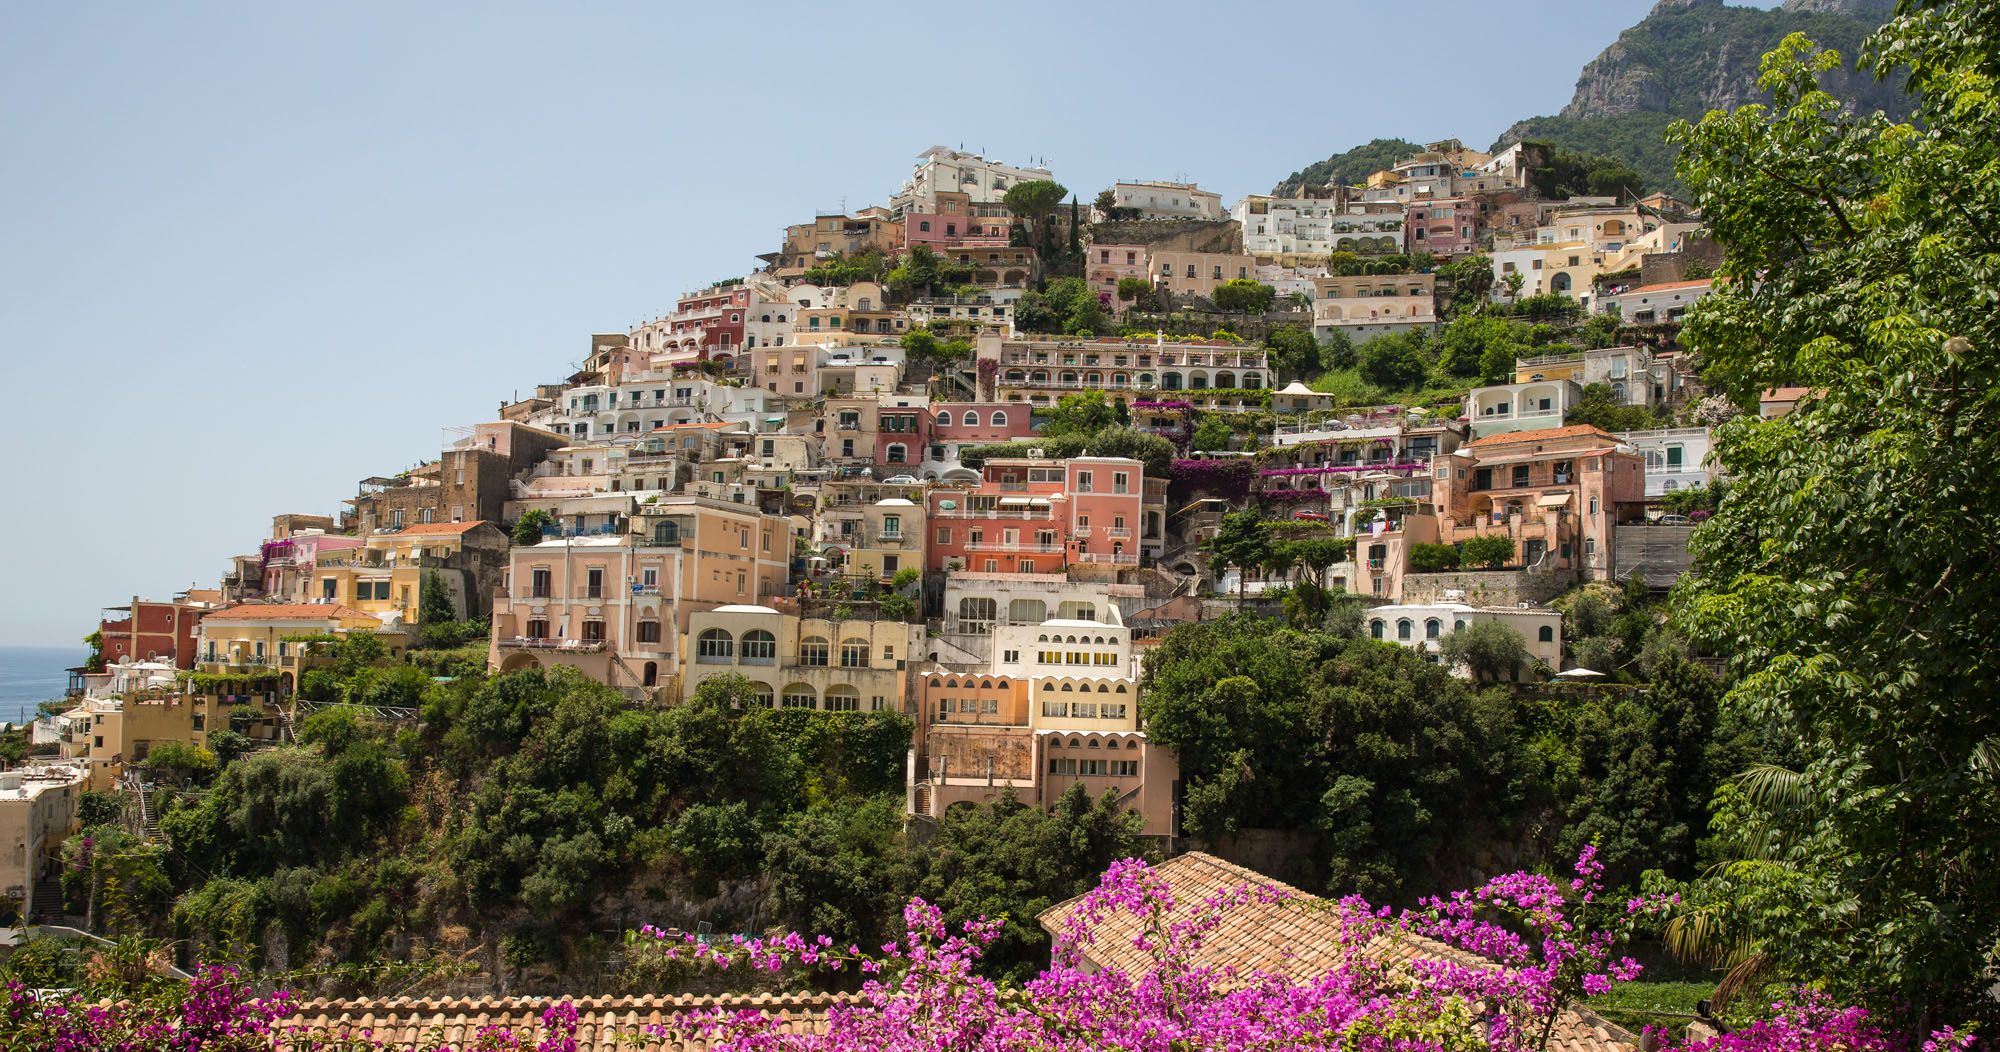 Featured image for “Positano, Our Favorite Town on the Amalfi Coast”